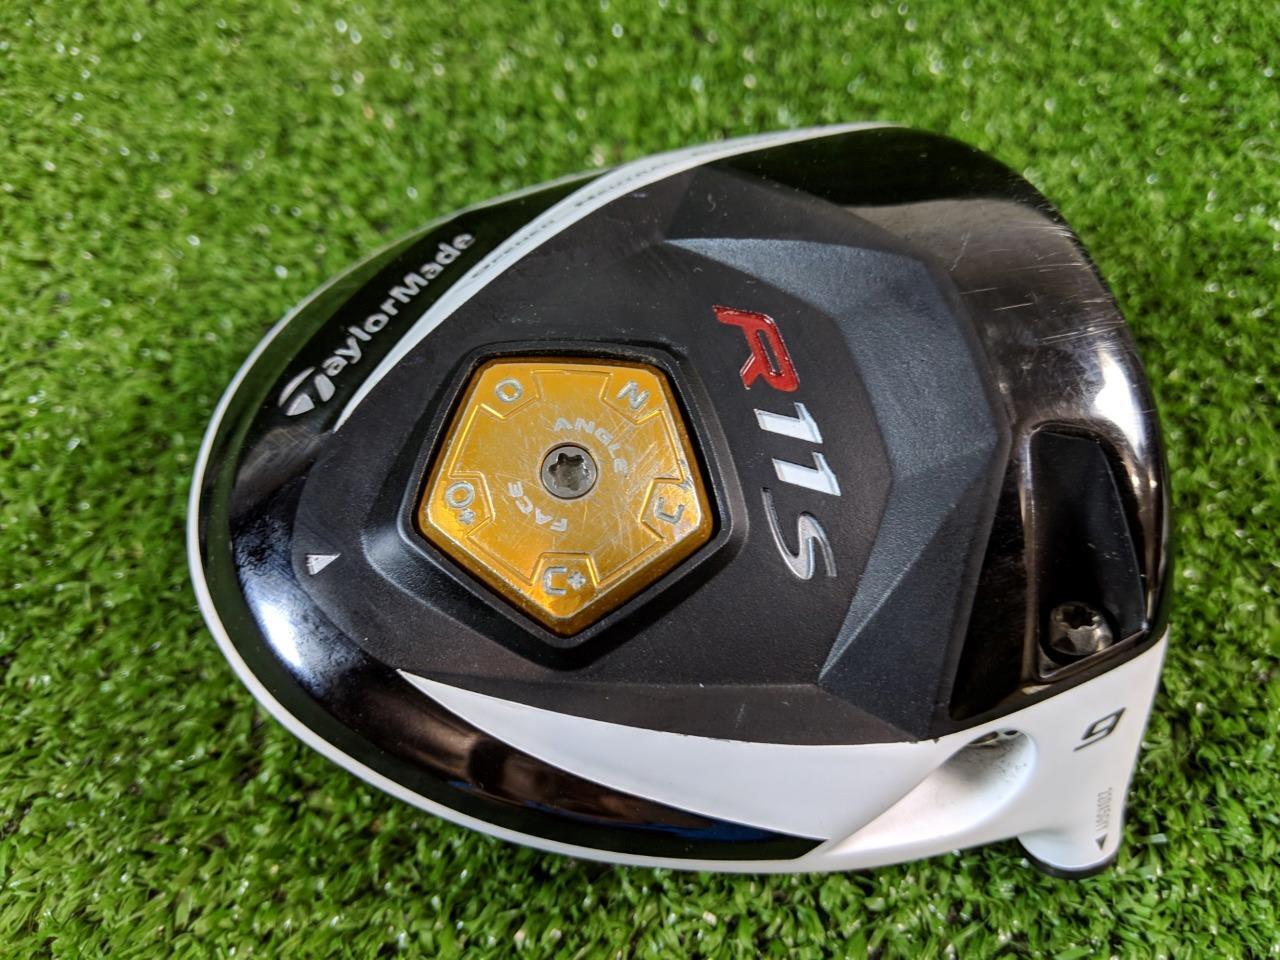 TaylorMade R11s Driver 9 degree Head Only Golf Club